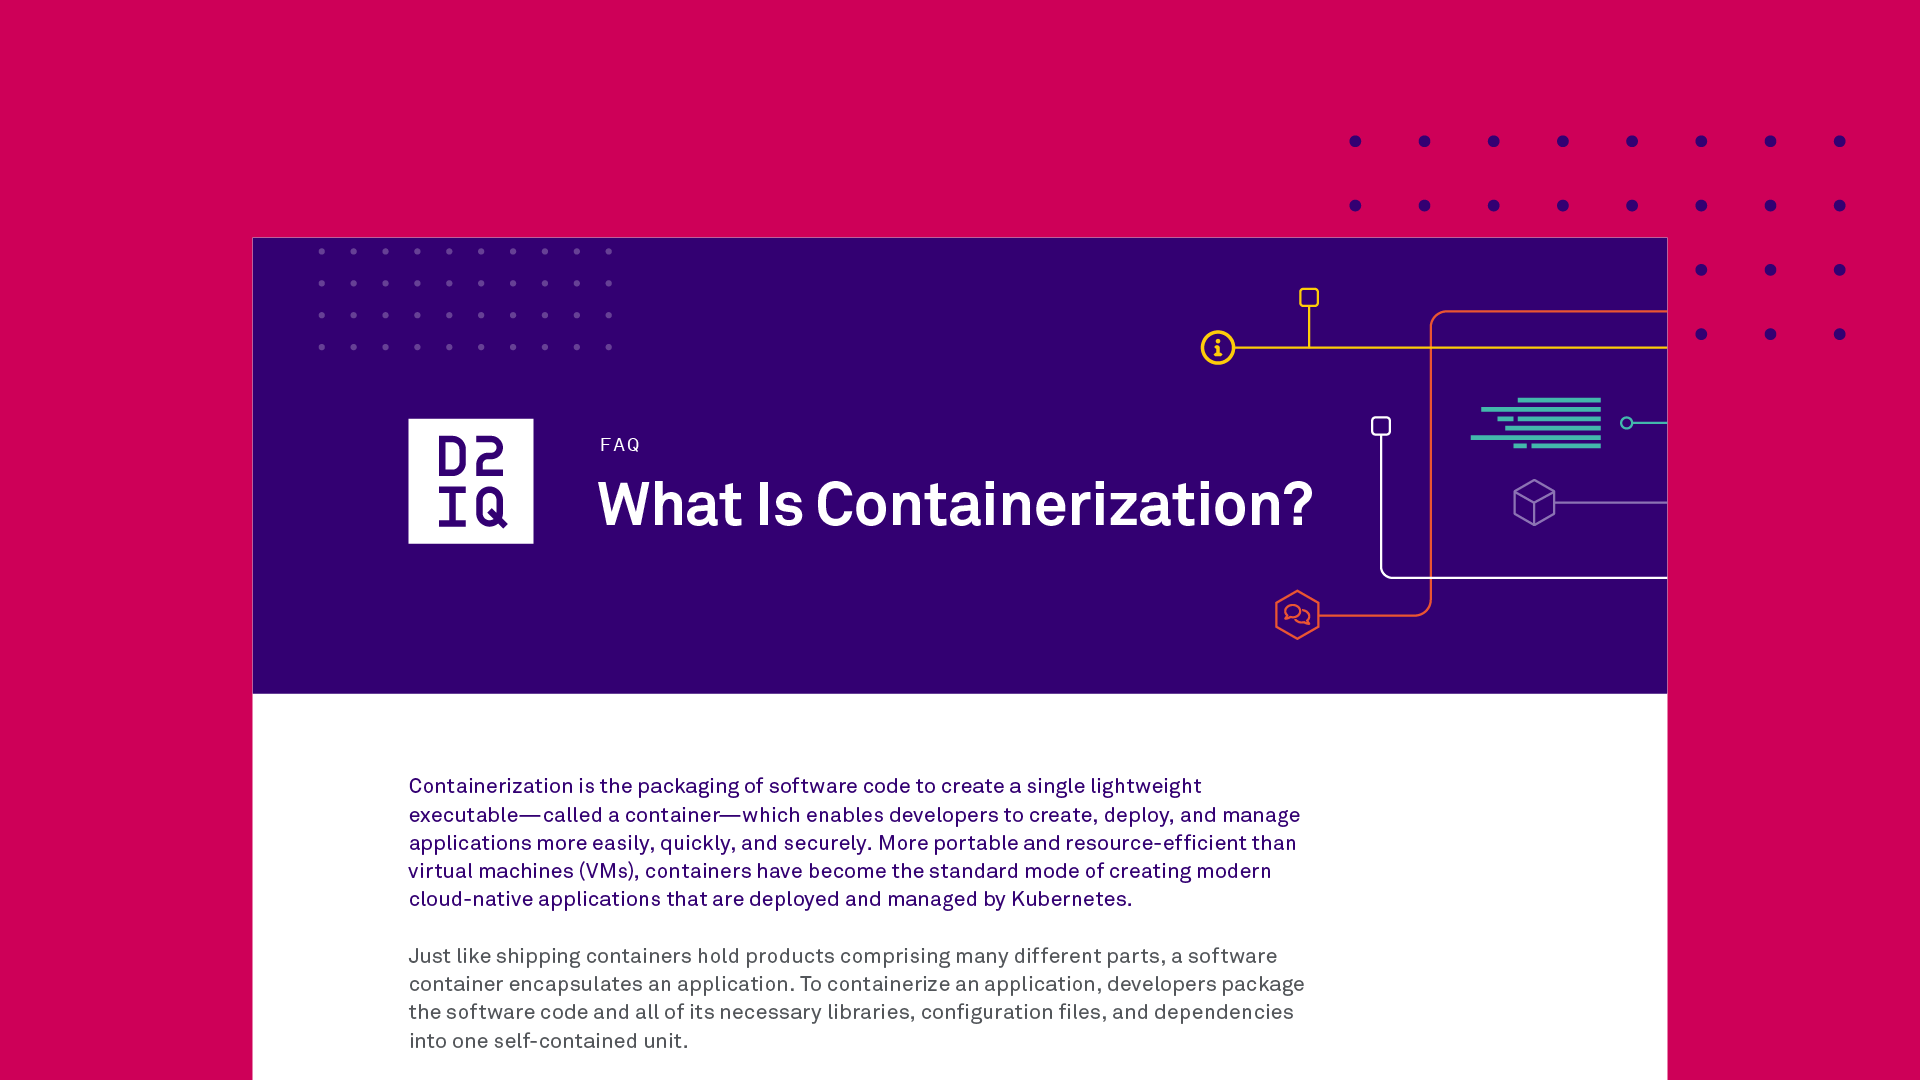 What is Ccntainerization?